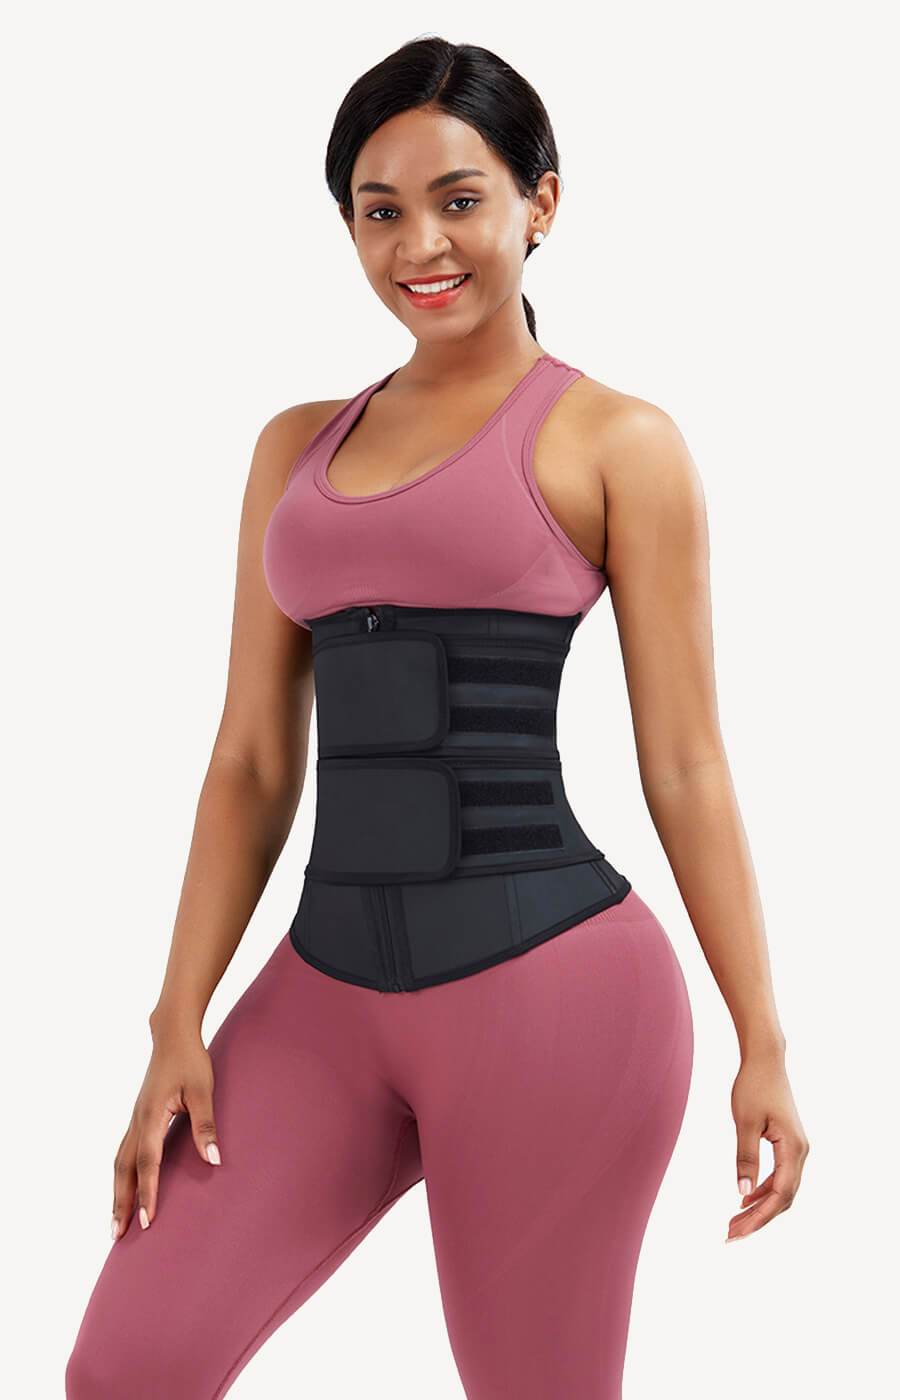 How to buy Shapewear if You Are New to Body Shaping